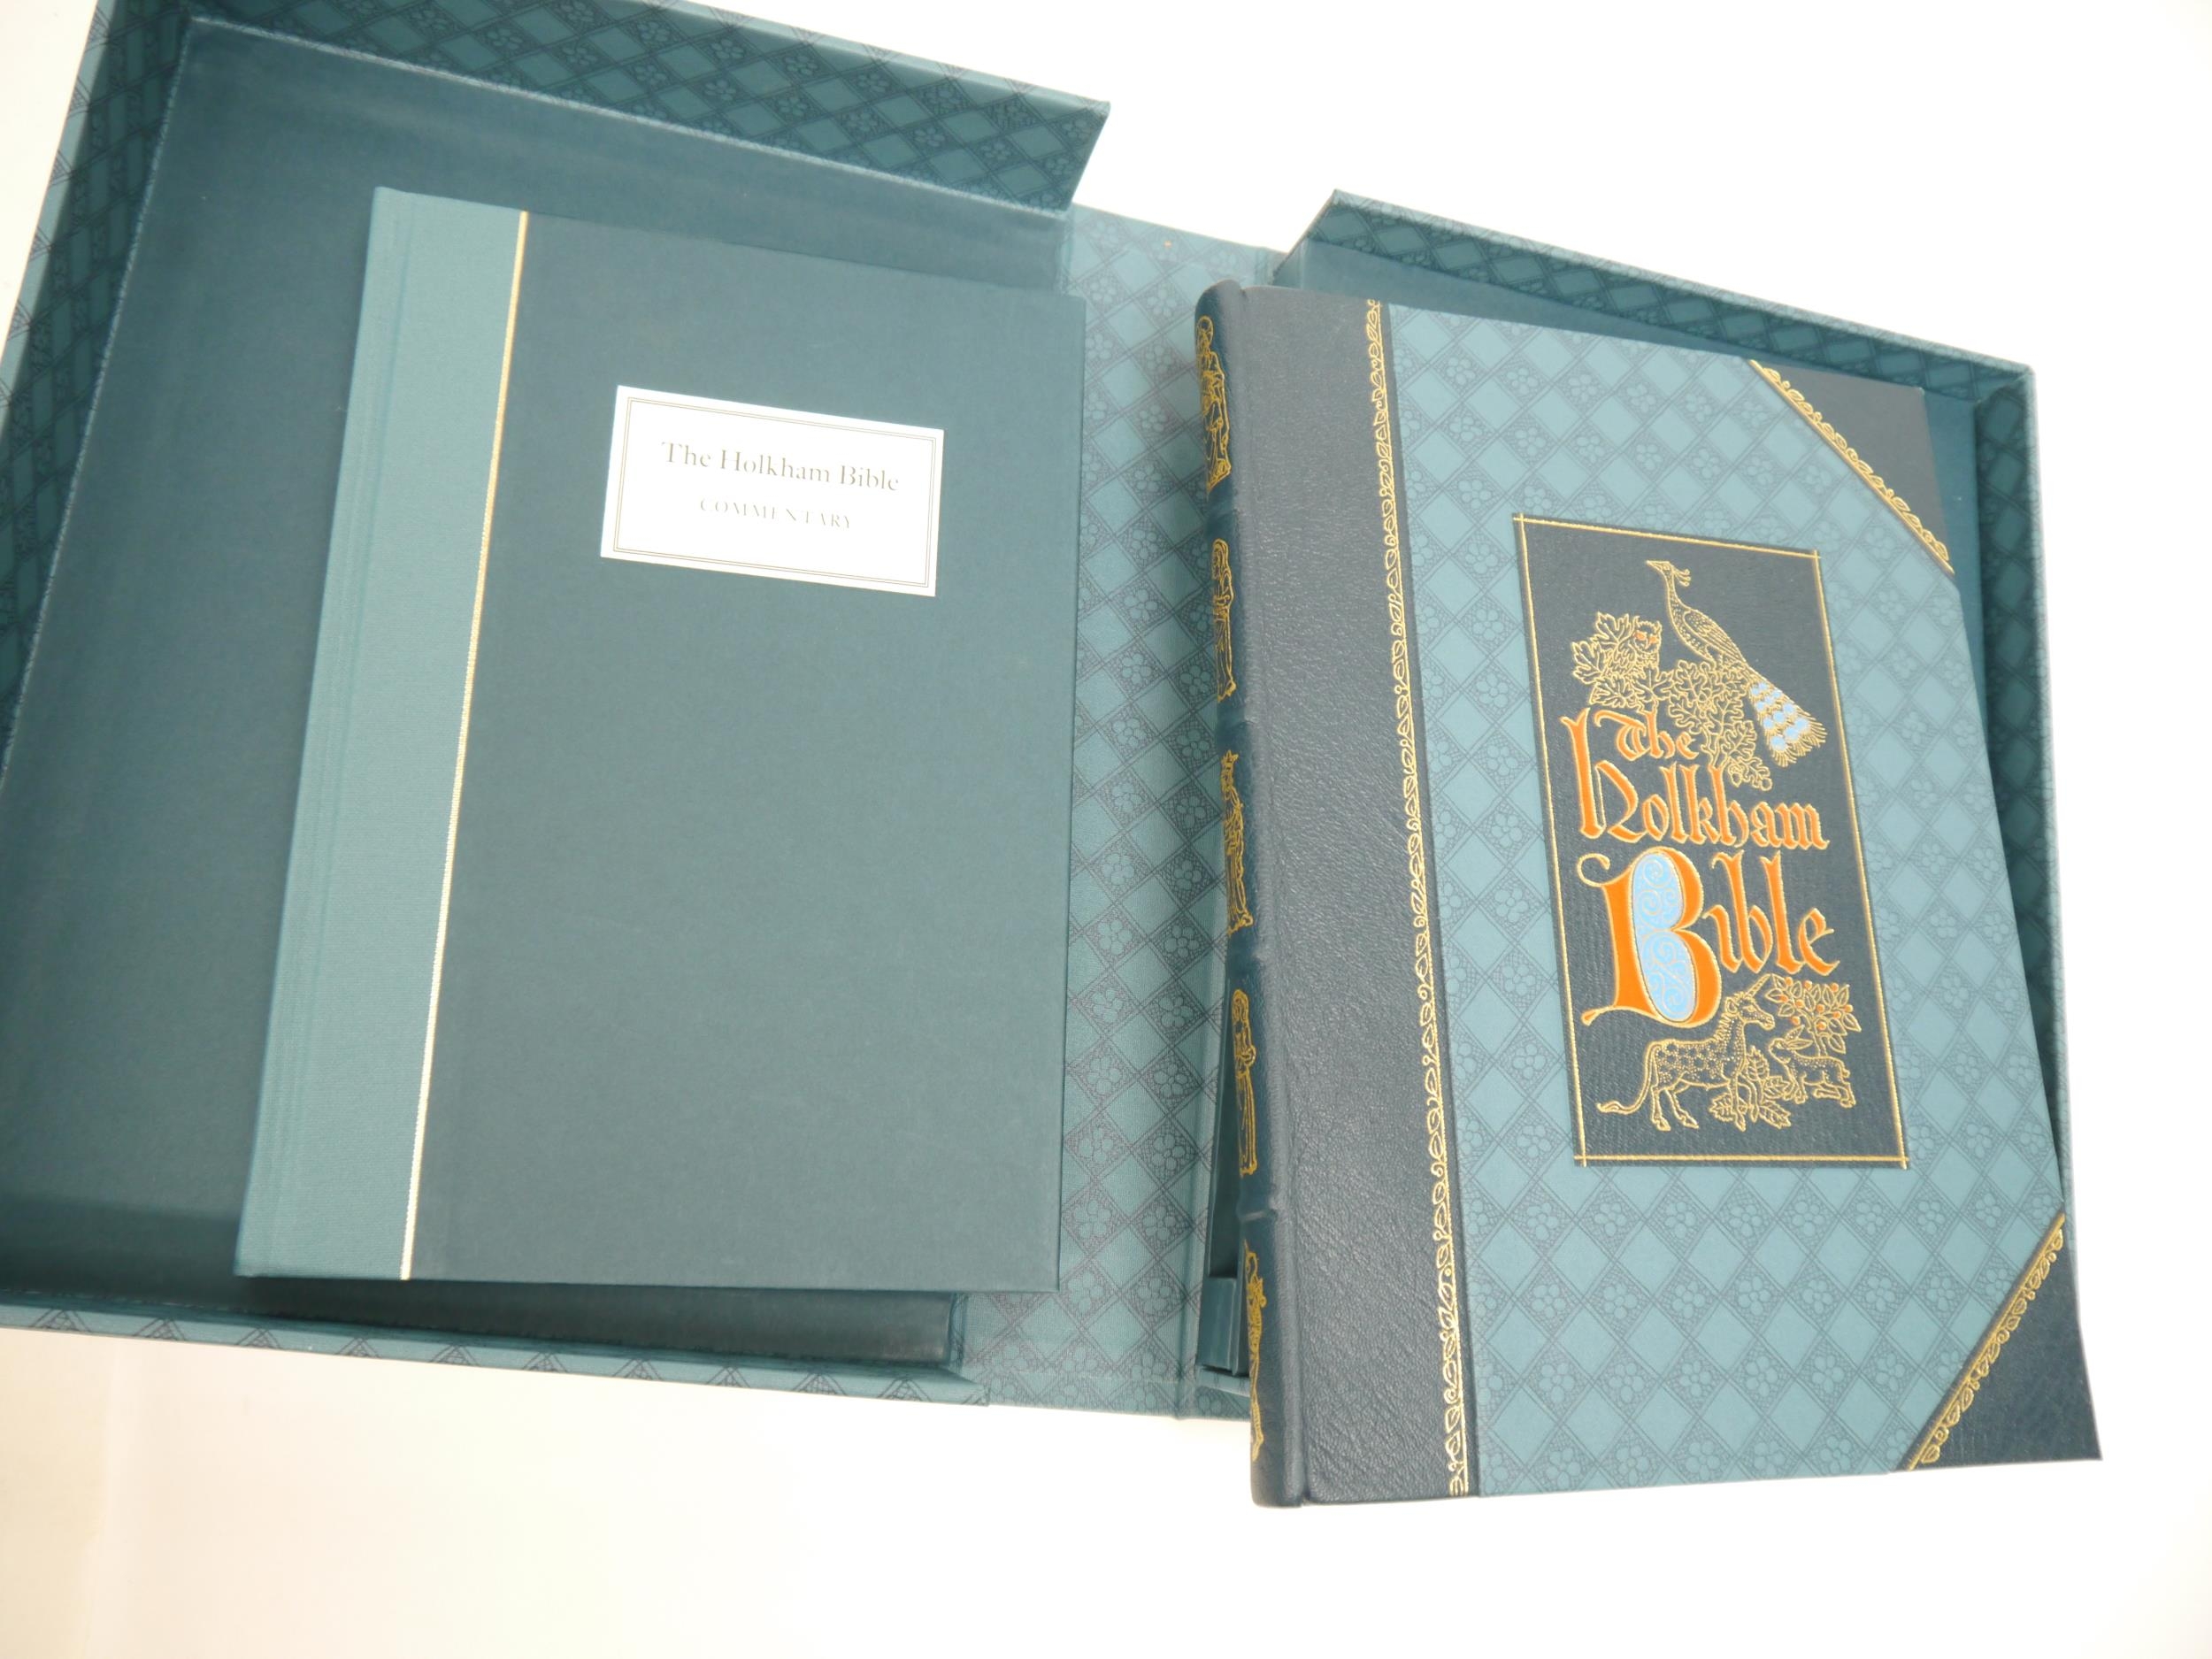 (Folio Society.) 'The Holkham Bible', London, 2007, limited edition, number 252 of 1750 copies, 42